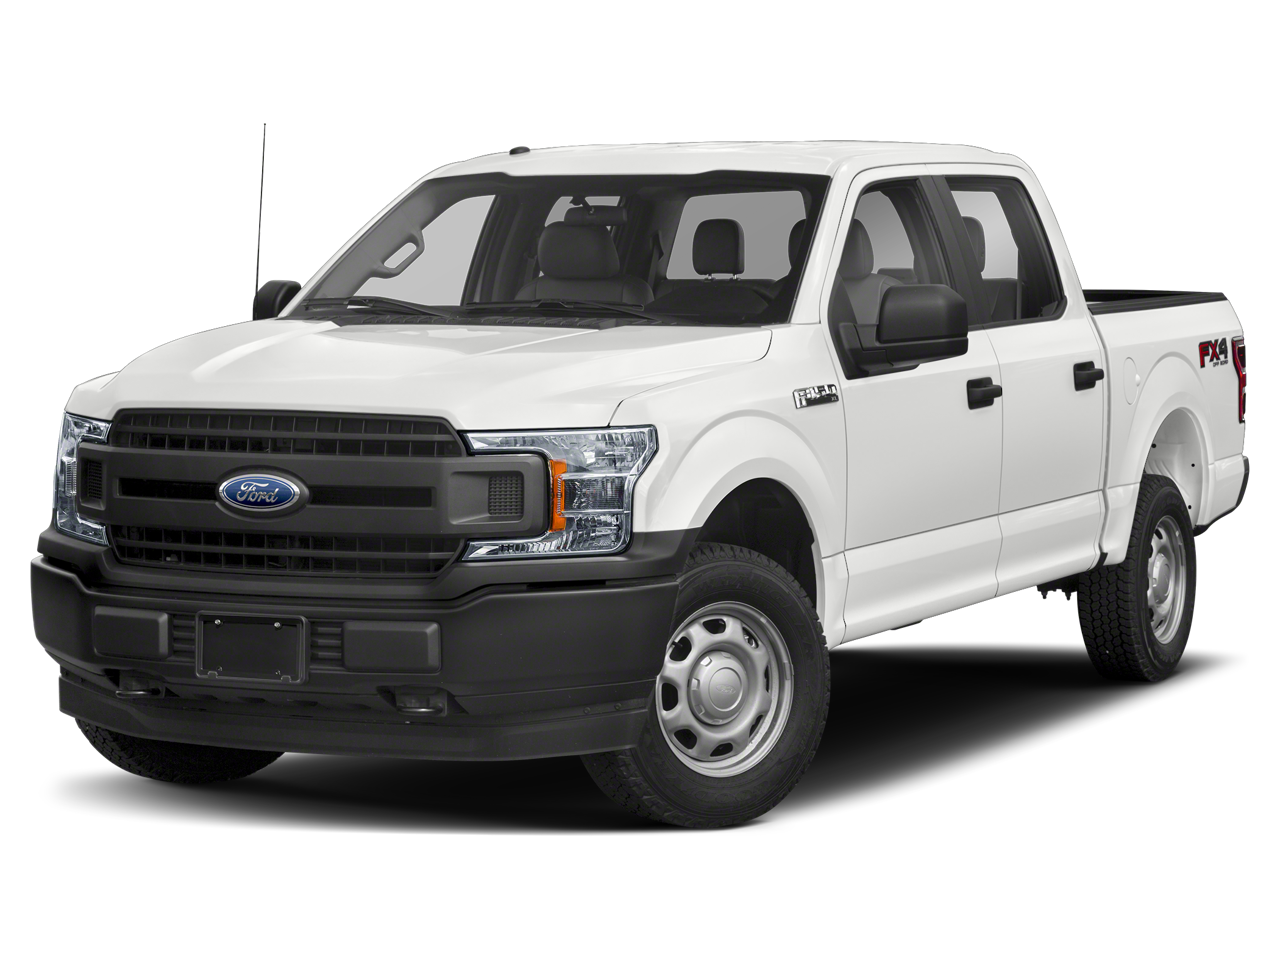 2019 Ford F-150 XL Trailer tow package Heavy-duty payload package